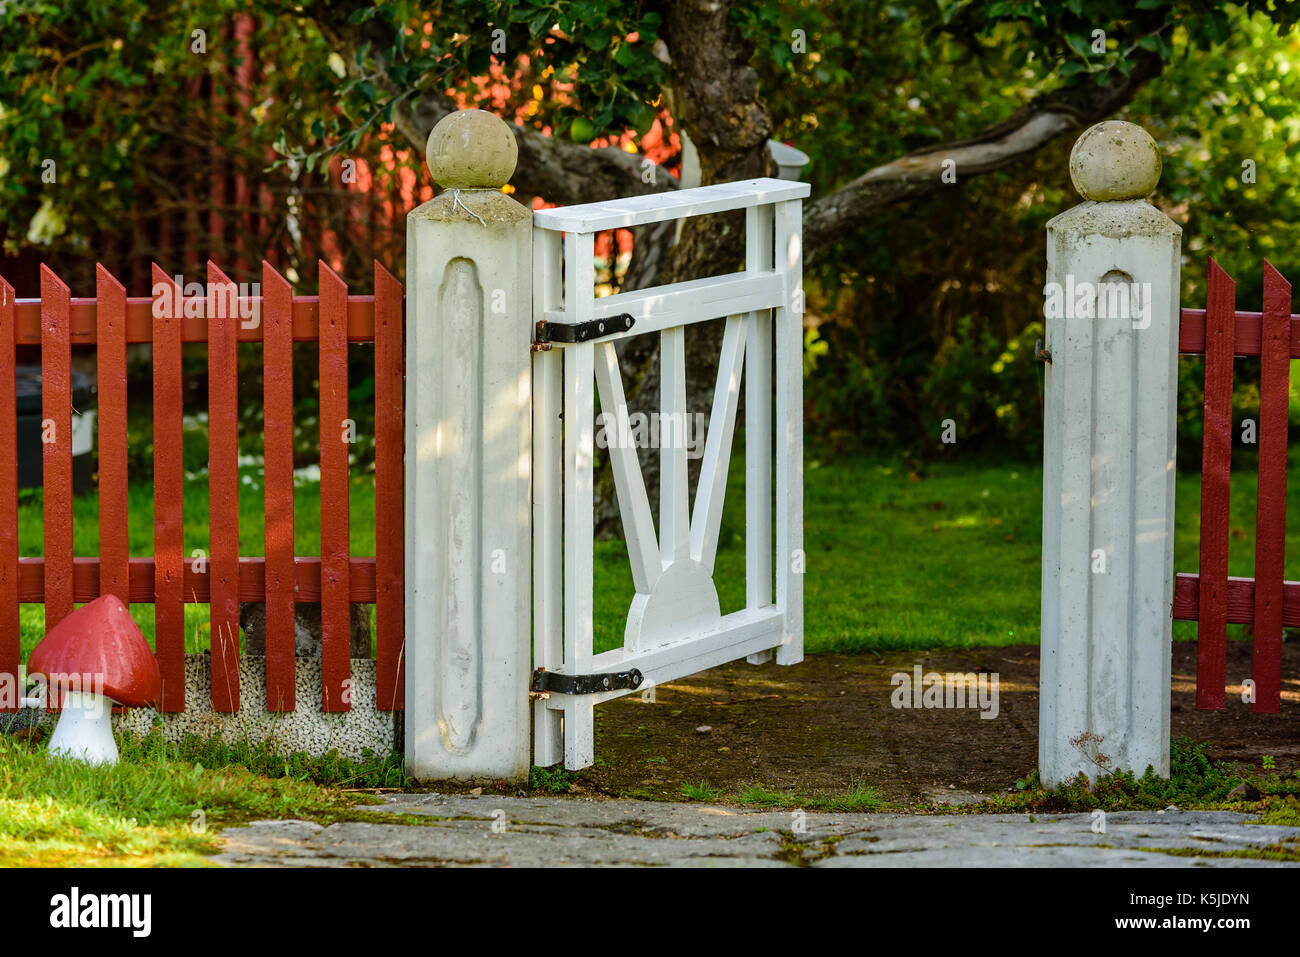 Open white garden gate on red picket fence. Lane and tree in background. Stock Photo